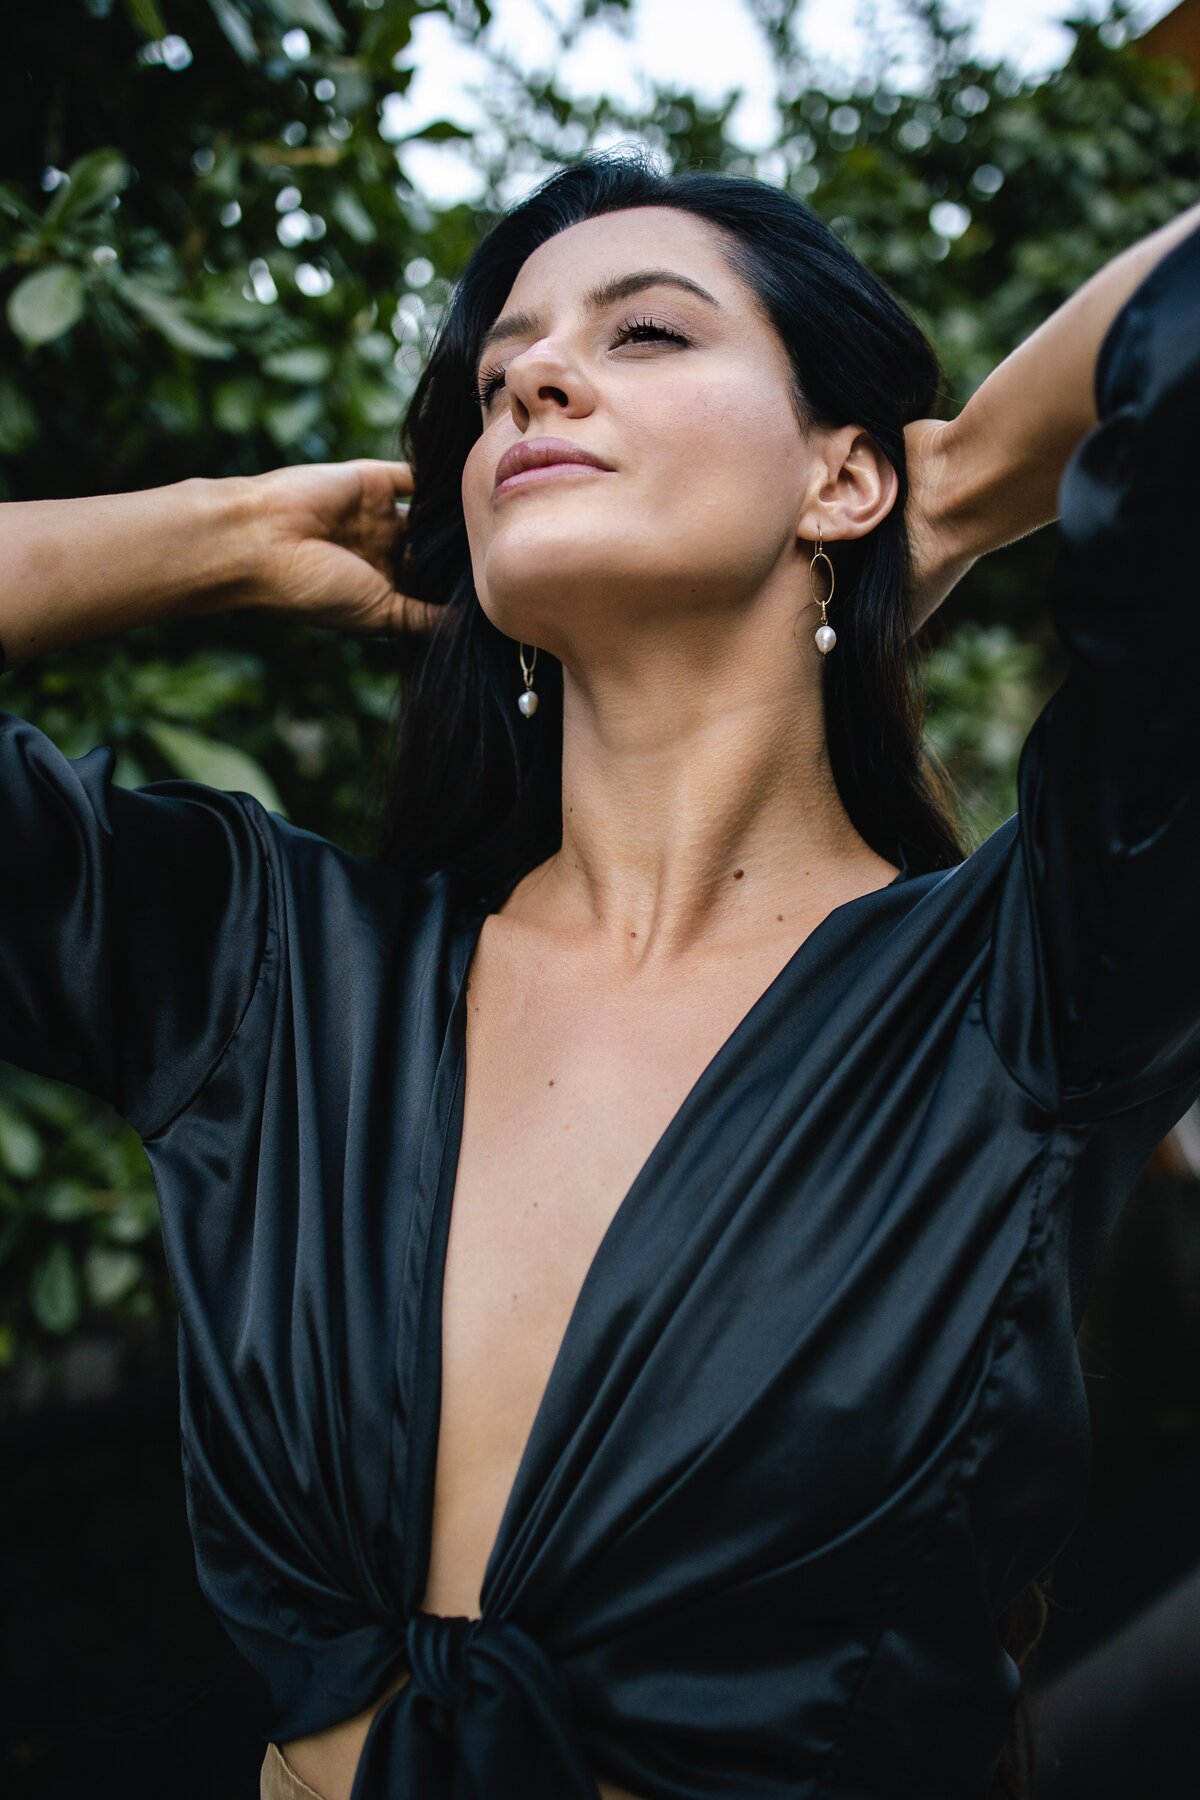 Costa Rica editorial jewelry campaign by Alex Perry videographer and photographer for conscious brands 